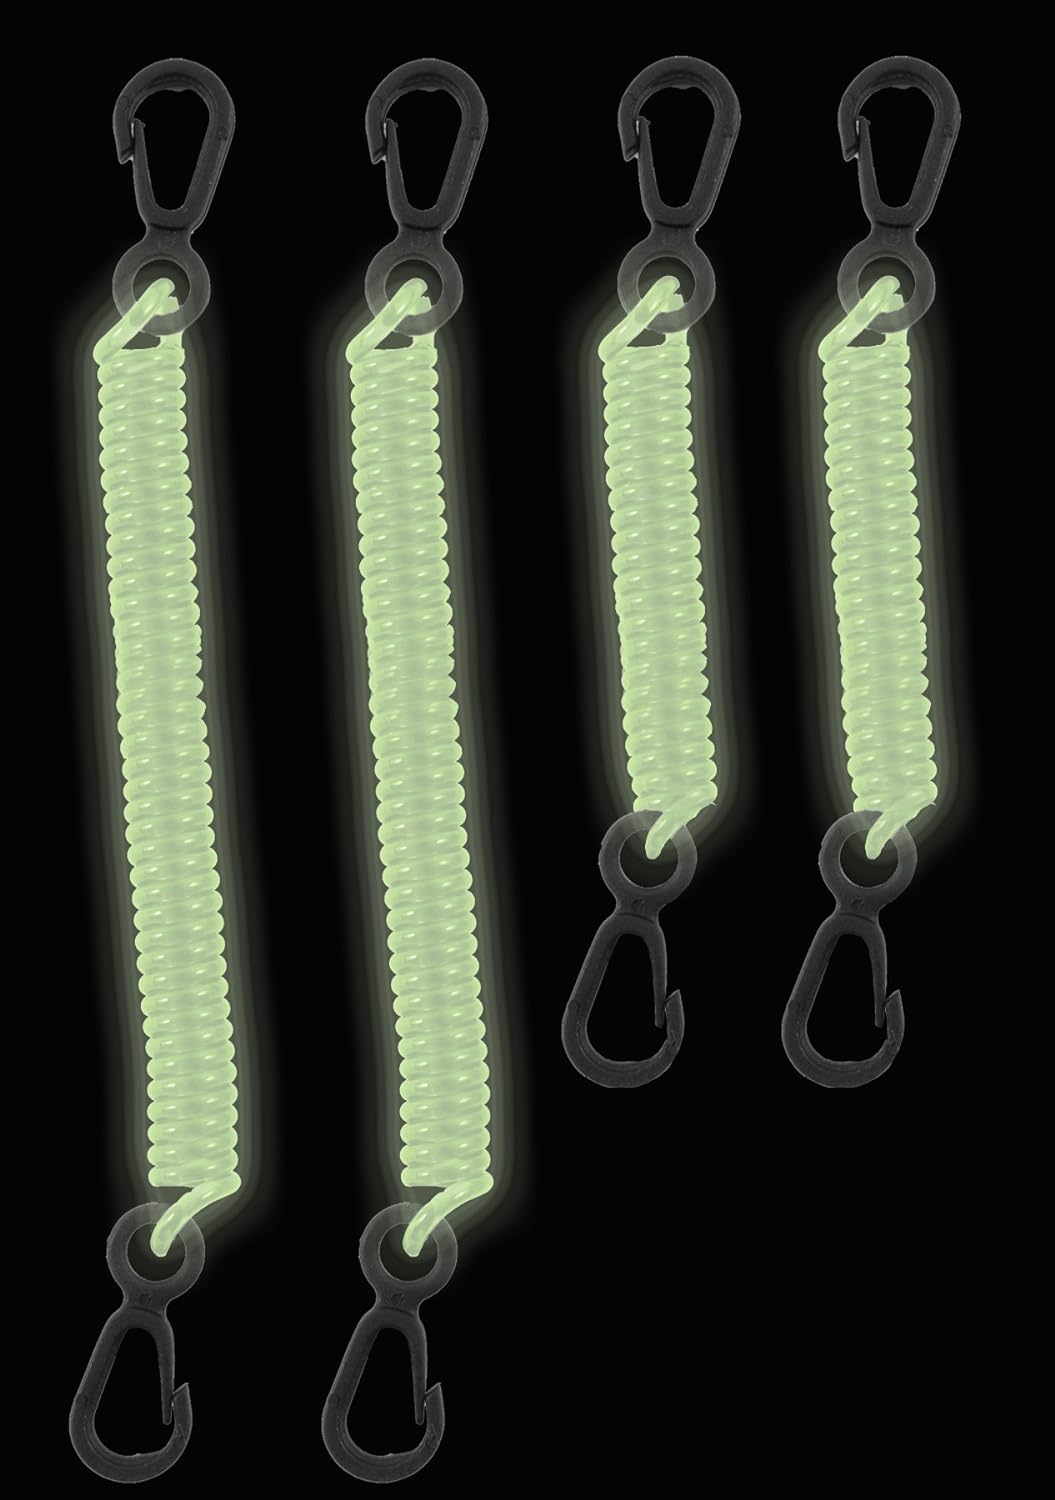 DRY DOC COILED TETHER 4-PACK